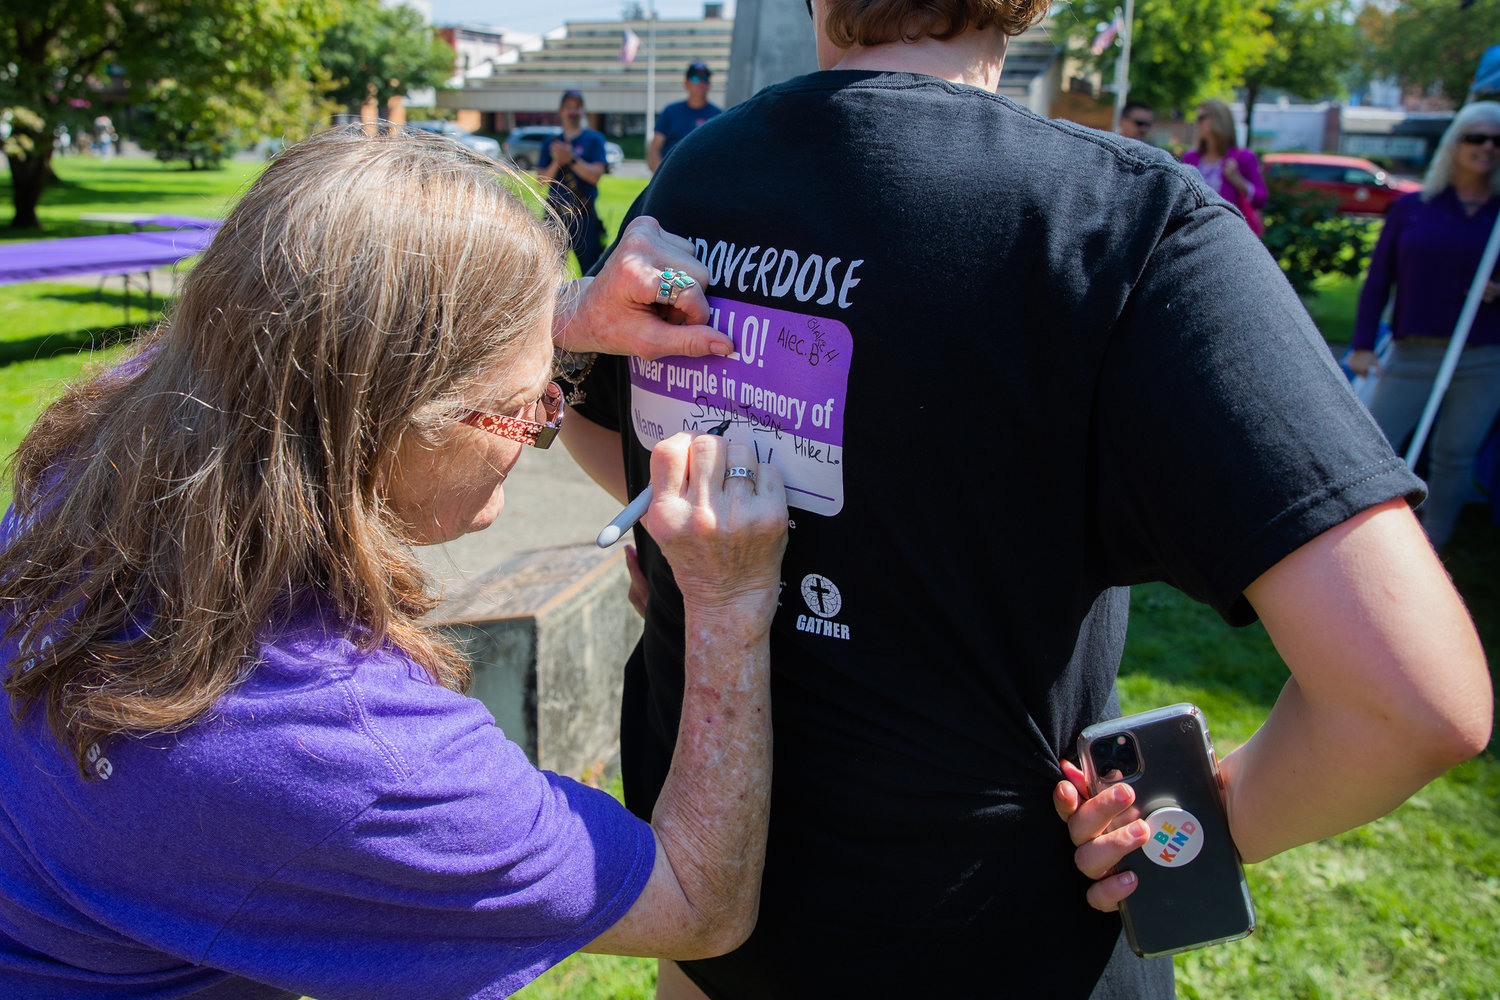 Deana Terrone writes “Shyla Towne” on the back of a shirt in memory of her daughter during an overdose awareness event at George Washington Park in Centralia on Wednesday.